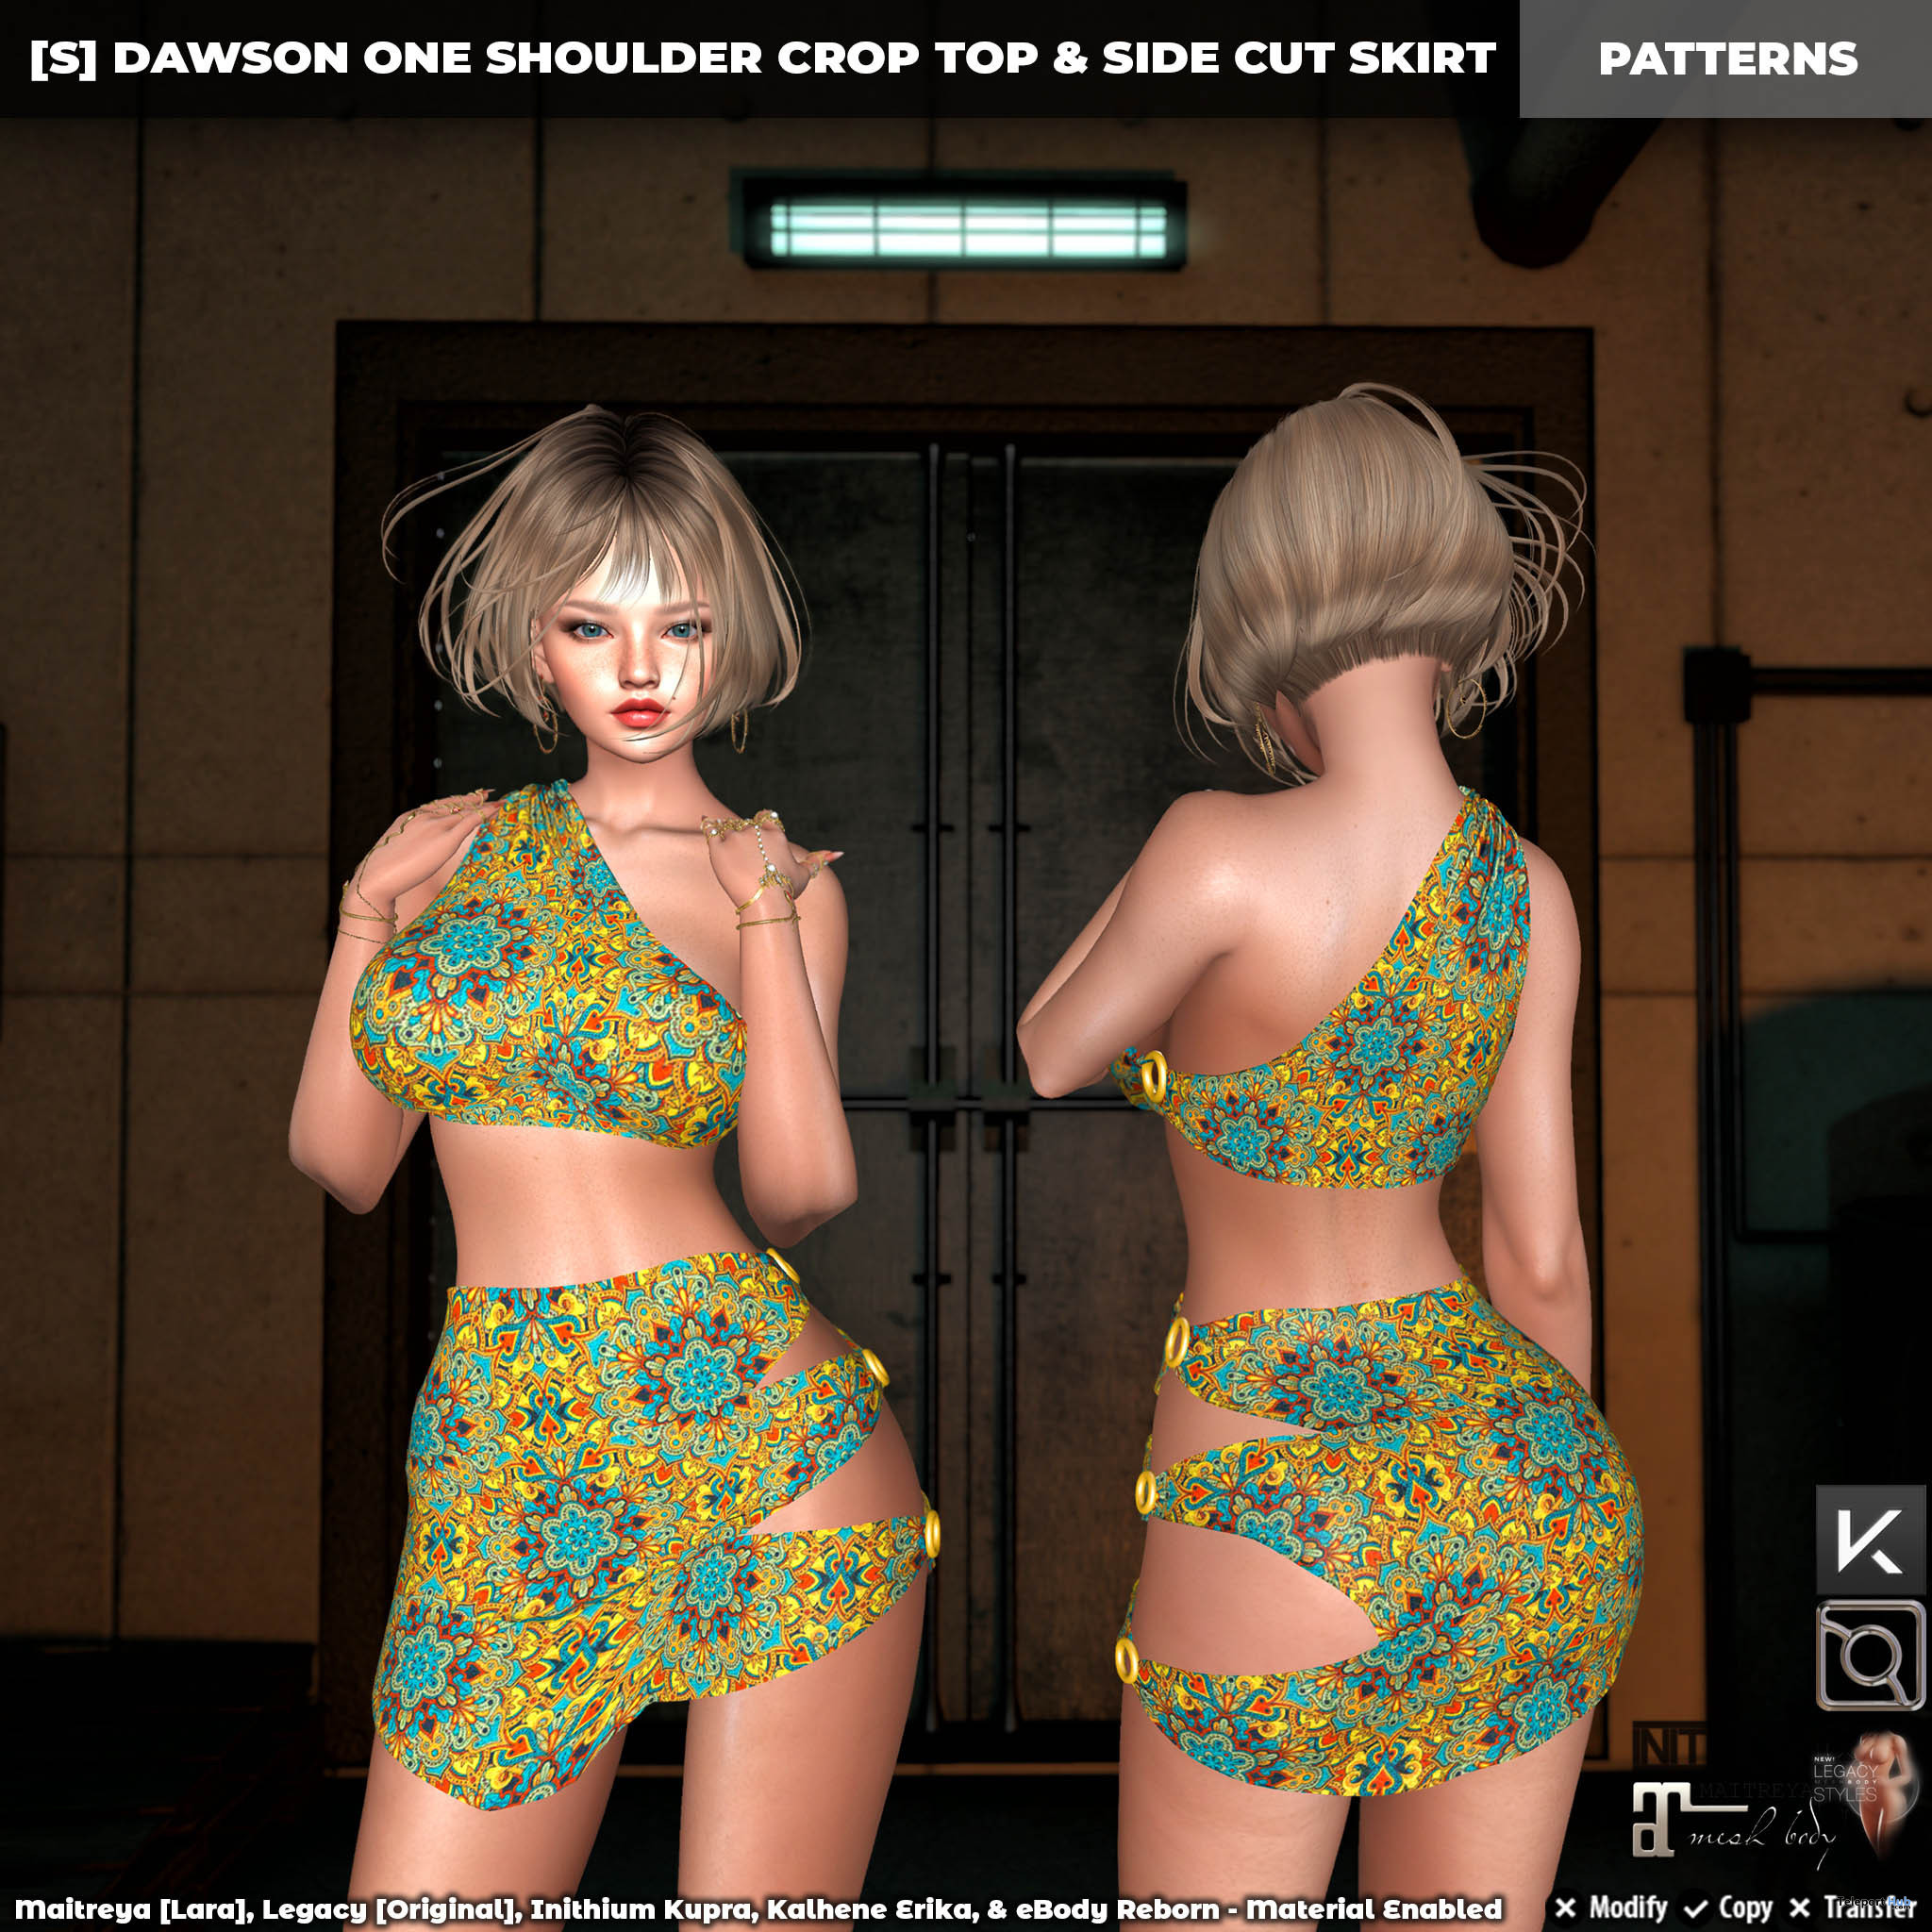 New Release: [S] Dawson One Shoulder Crop Top & Side Cut Skirt by [satus Inc] - Teleport Hub - teleporthub.com